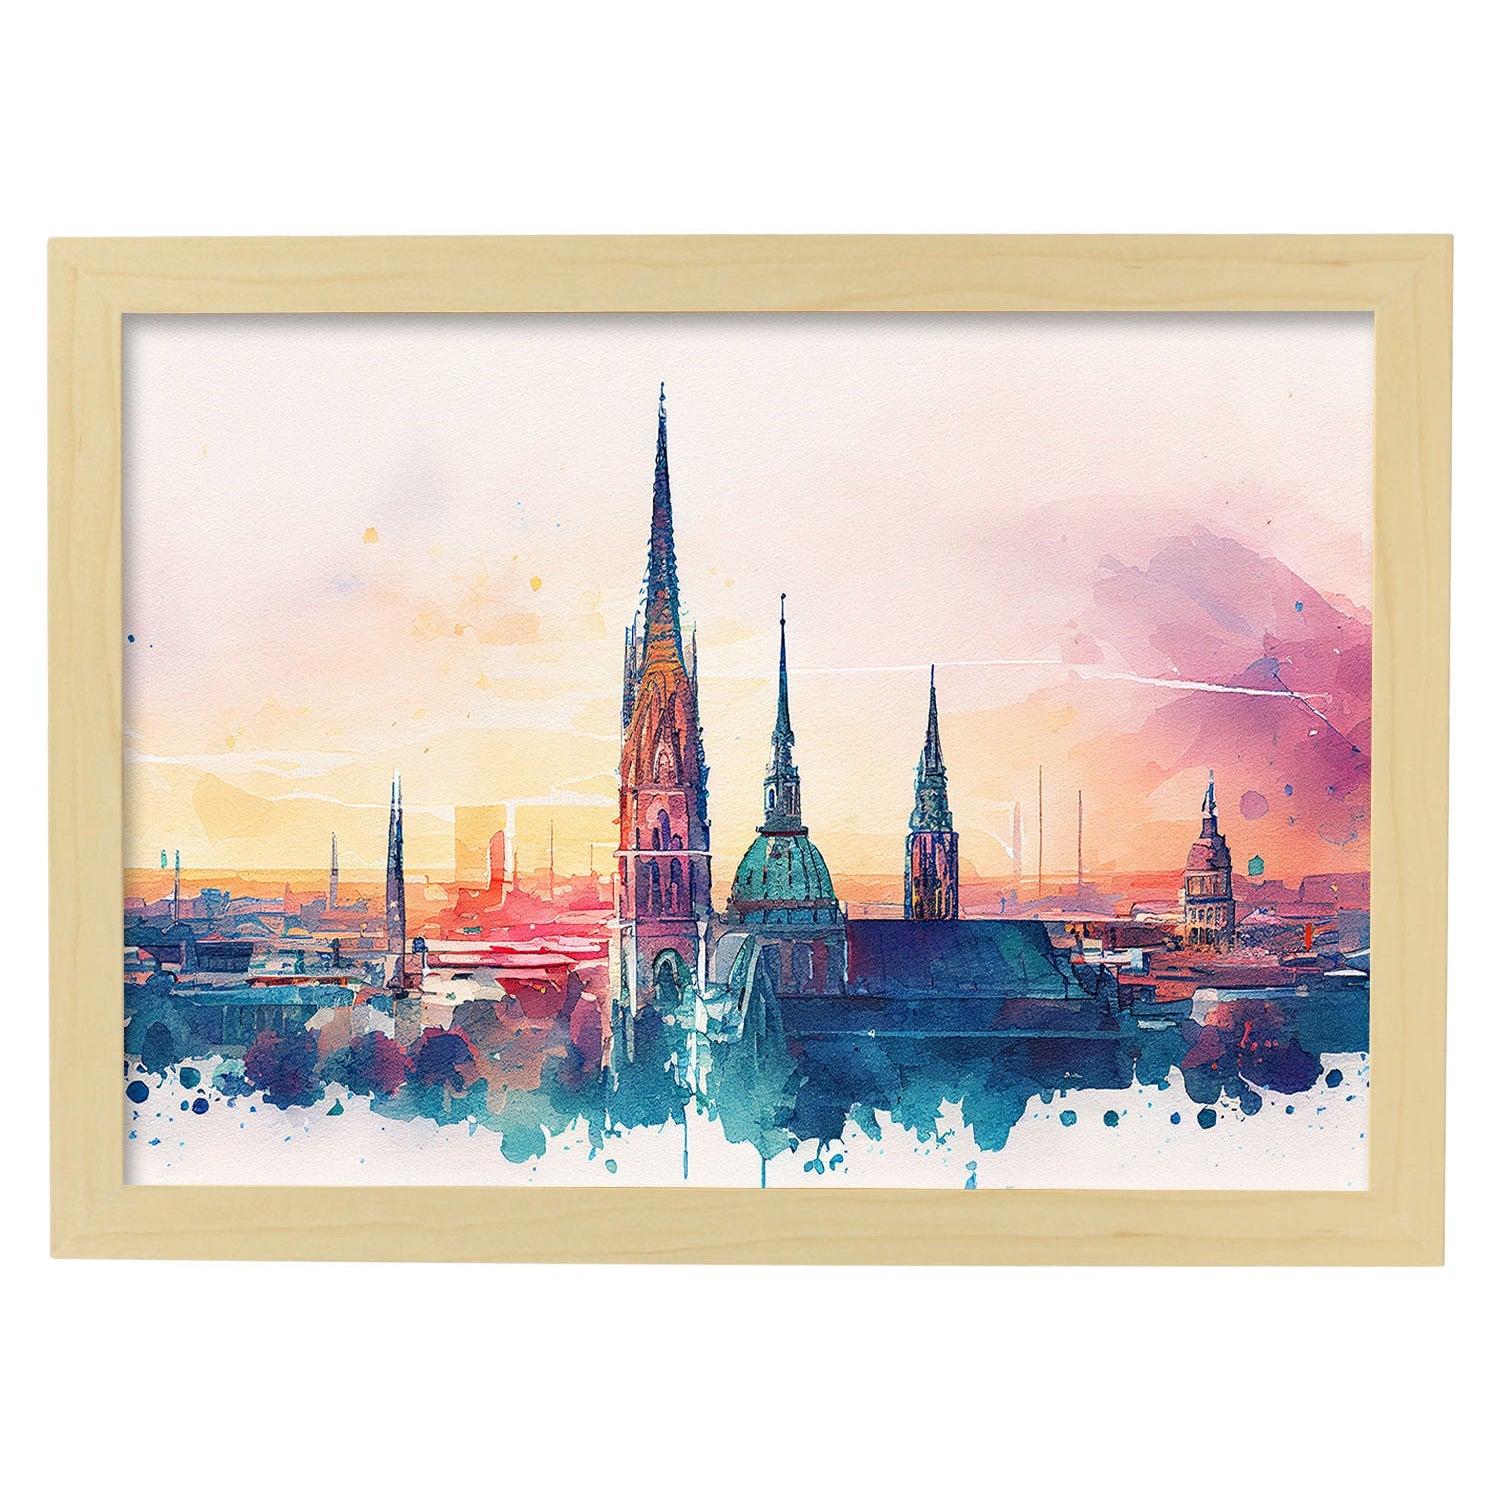 Nacnic watercolor of a skyline of the city of Vienna_4. Aesthetic Wall Art Prints for Bedroom or Living Room Design.-Artwork-Nacnic-A4-Marco Madera Clara-Nacnic Estudio SL